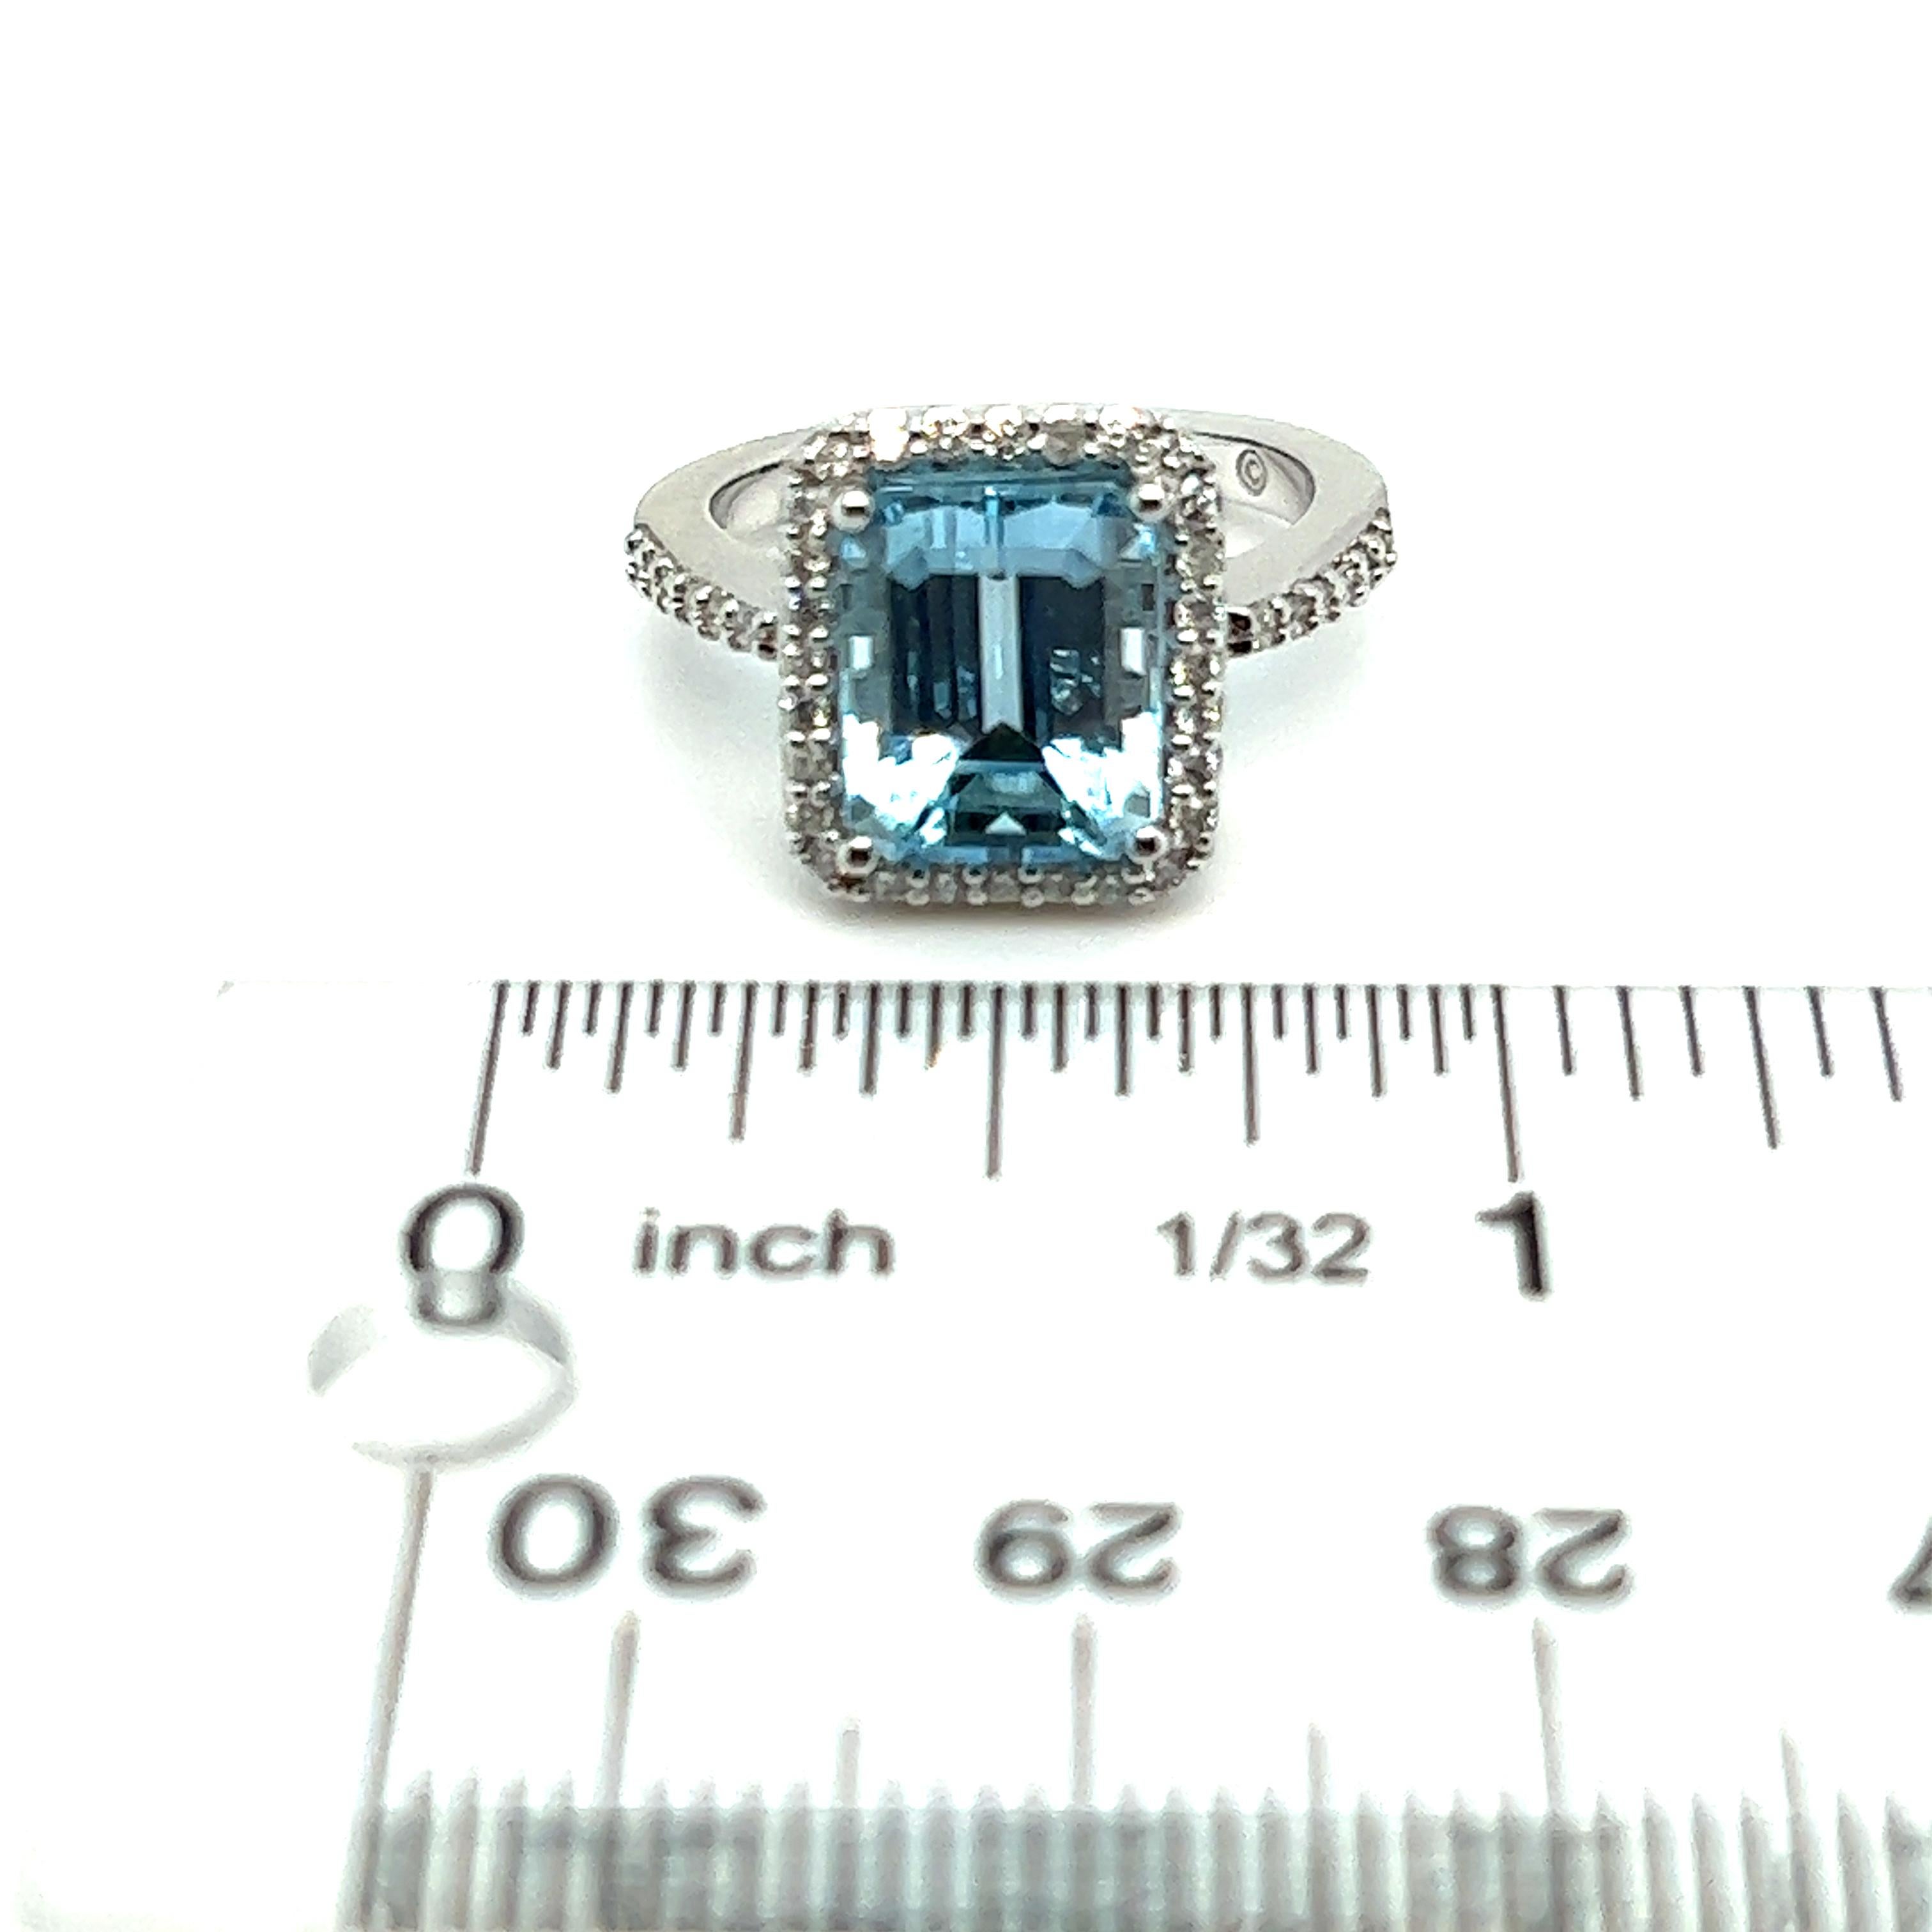 Natural Finely Faceted Quality Topaz Diamond Ring 6.5 14k W Gold 5.1 TCW Certified $3,950 308482

This is a one of a Kind Unique Custom Made Glamorous Piece of Jewelry!

Nothing says, “I Love you” more than Diamonds and Pearls!

This item has been